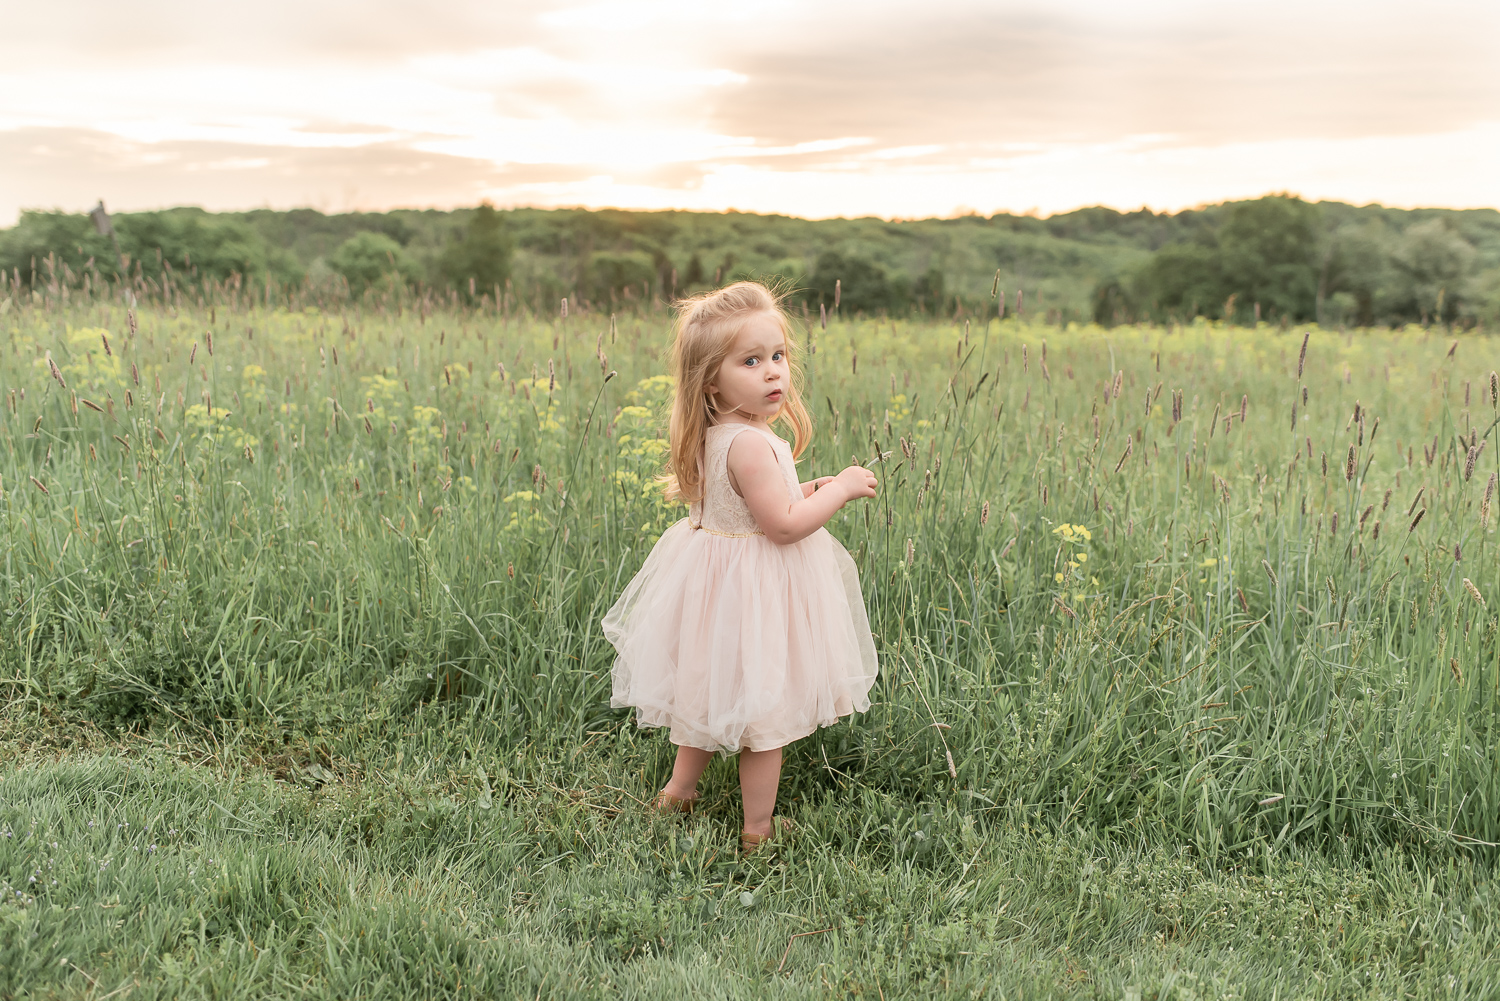 Young girl standing in field at sunset